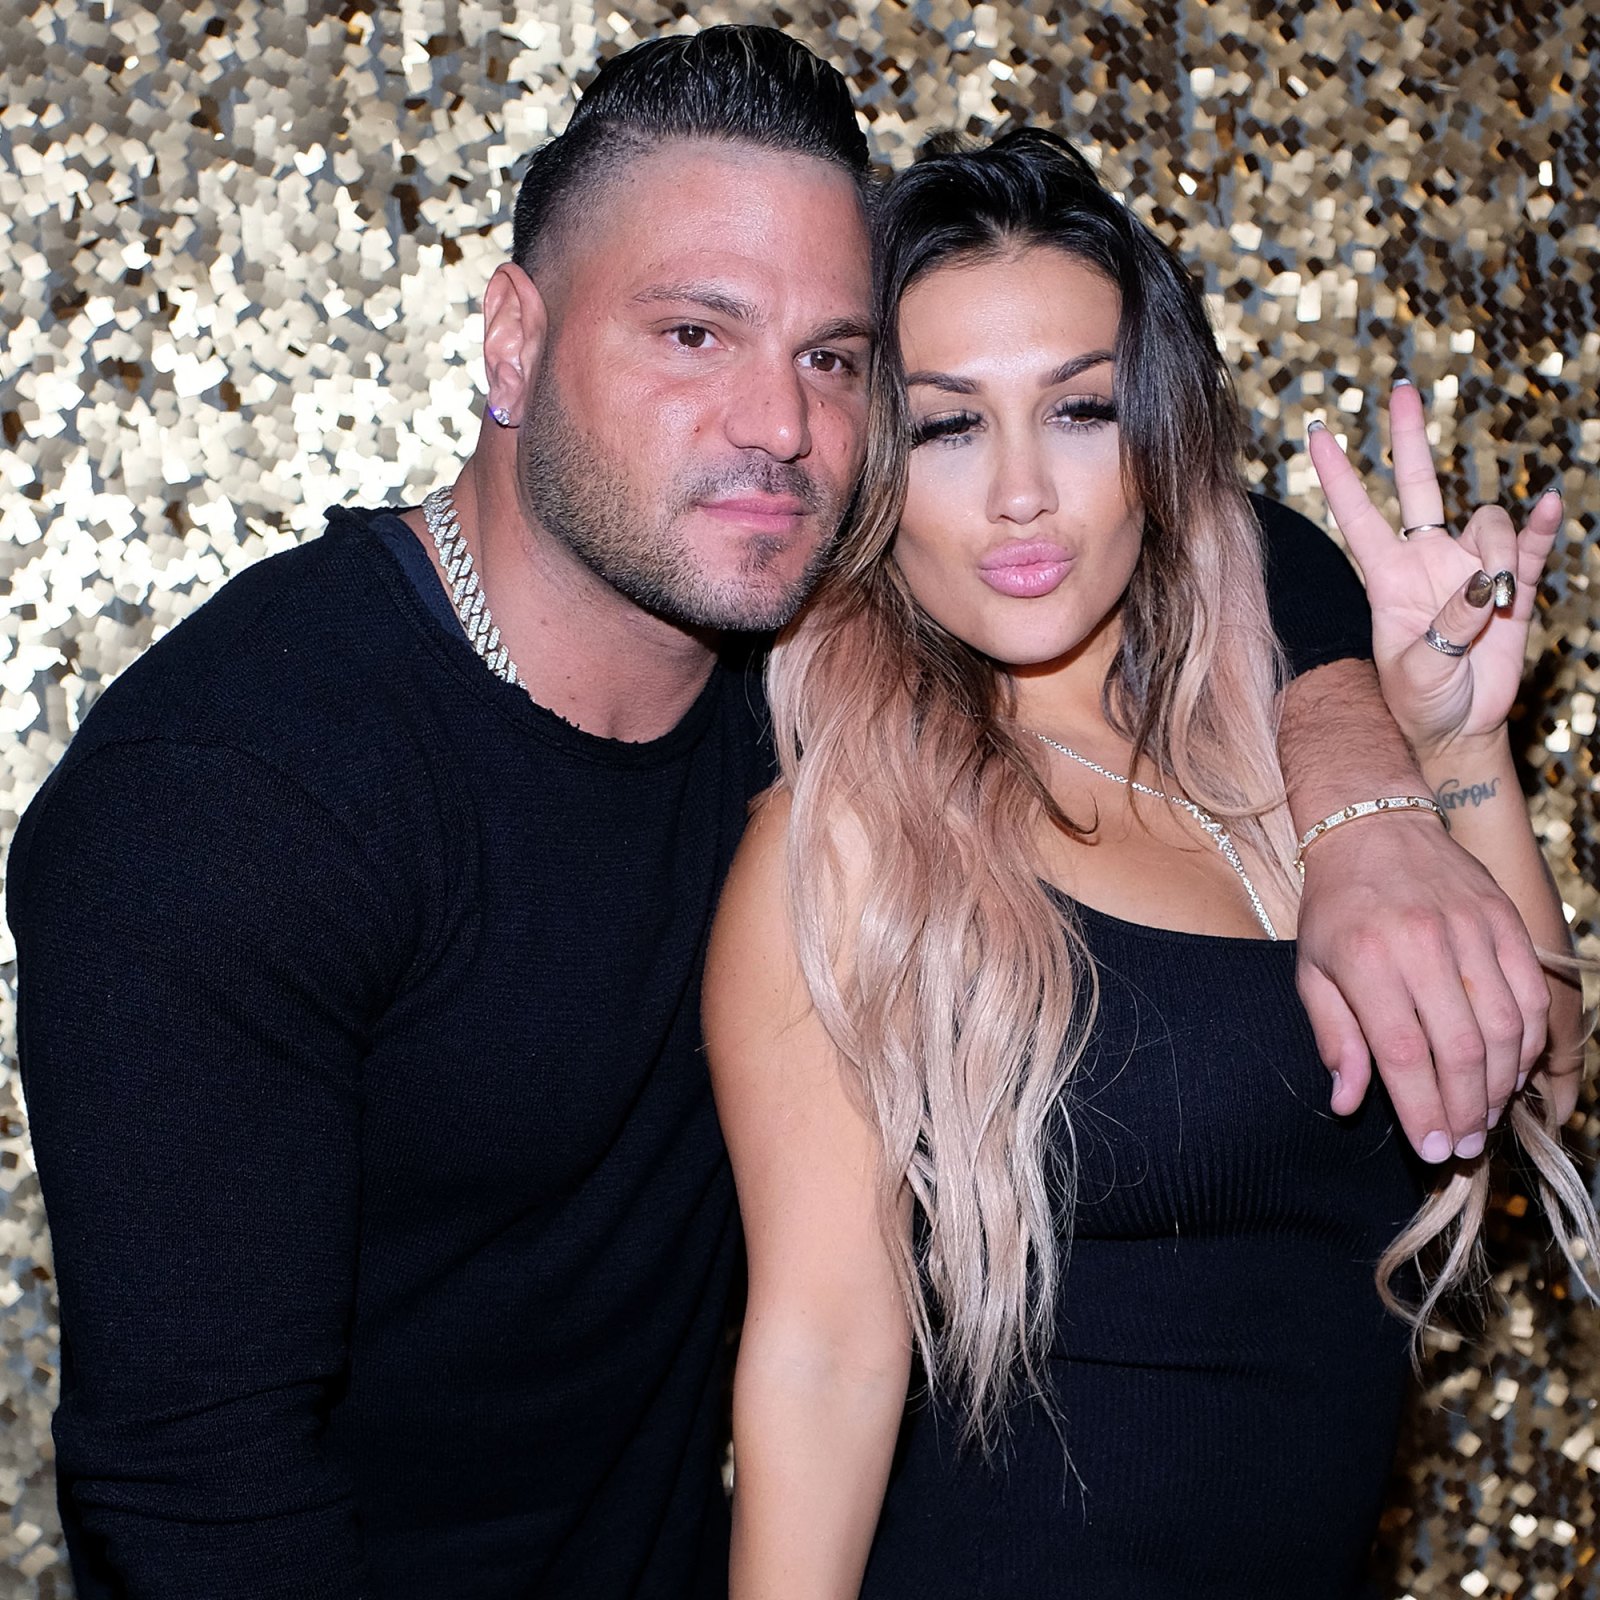 Ronnie OrtizMagro’s Ex Jen Harley Posts About ‘Peace’ After Split